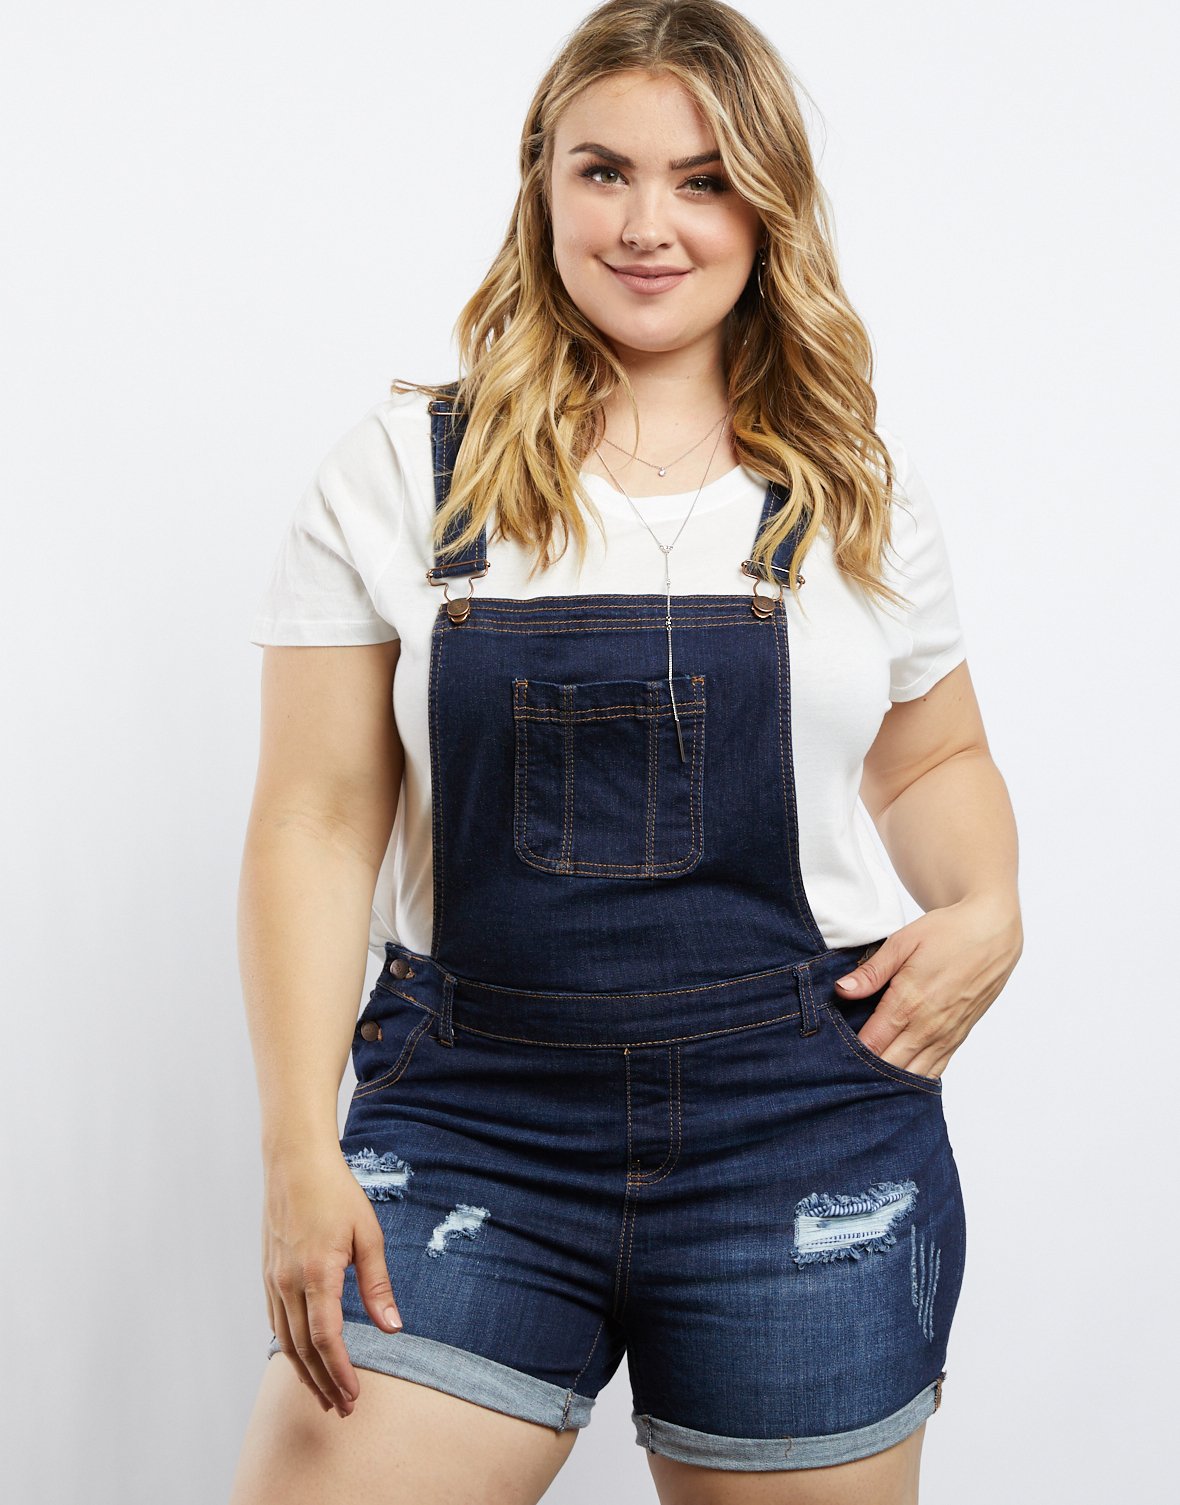 jean overall shorts plus size